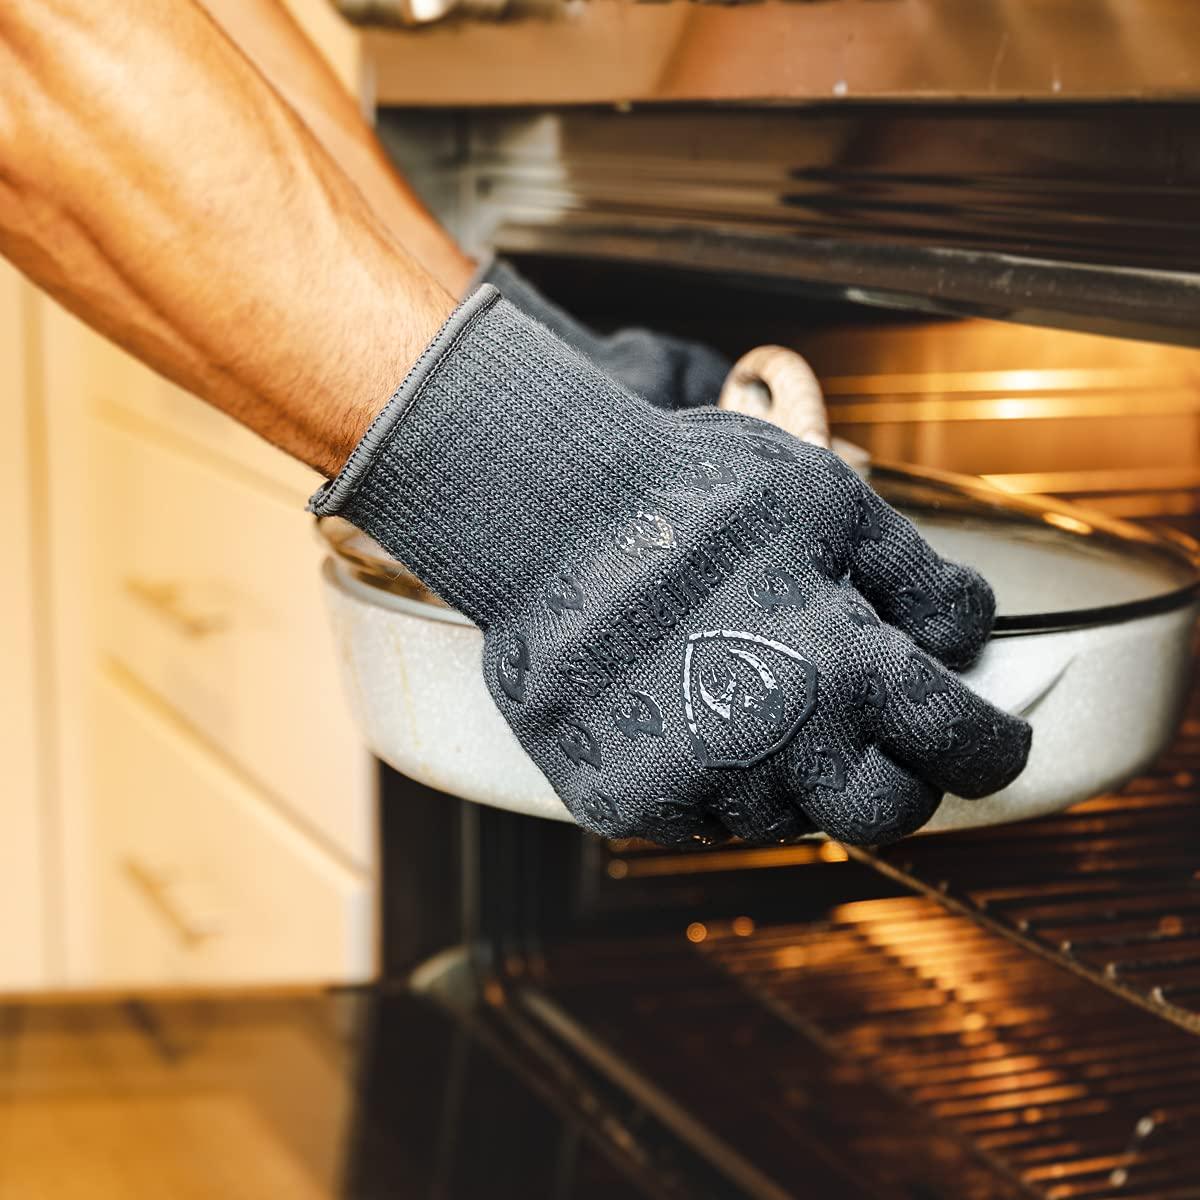 GRILL ARMOR GLOVES – Oven Gloves 932°F Extreme Heat & Cut Resistant Oven Mitts with Fingers for BBQ, Cooking, Grilling, Baking – Accessory for Smoker, Cast Iron, Fire Pit, Camping, Fireplace and More - CookCave